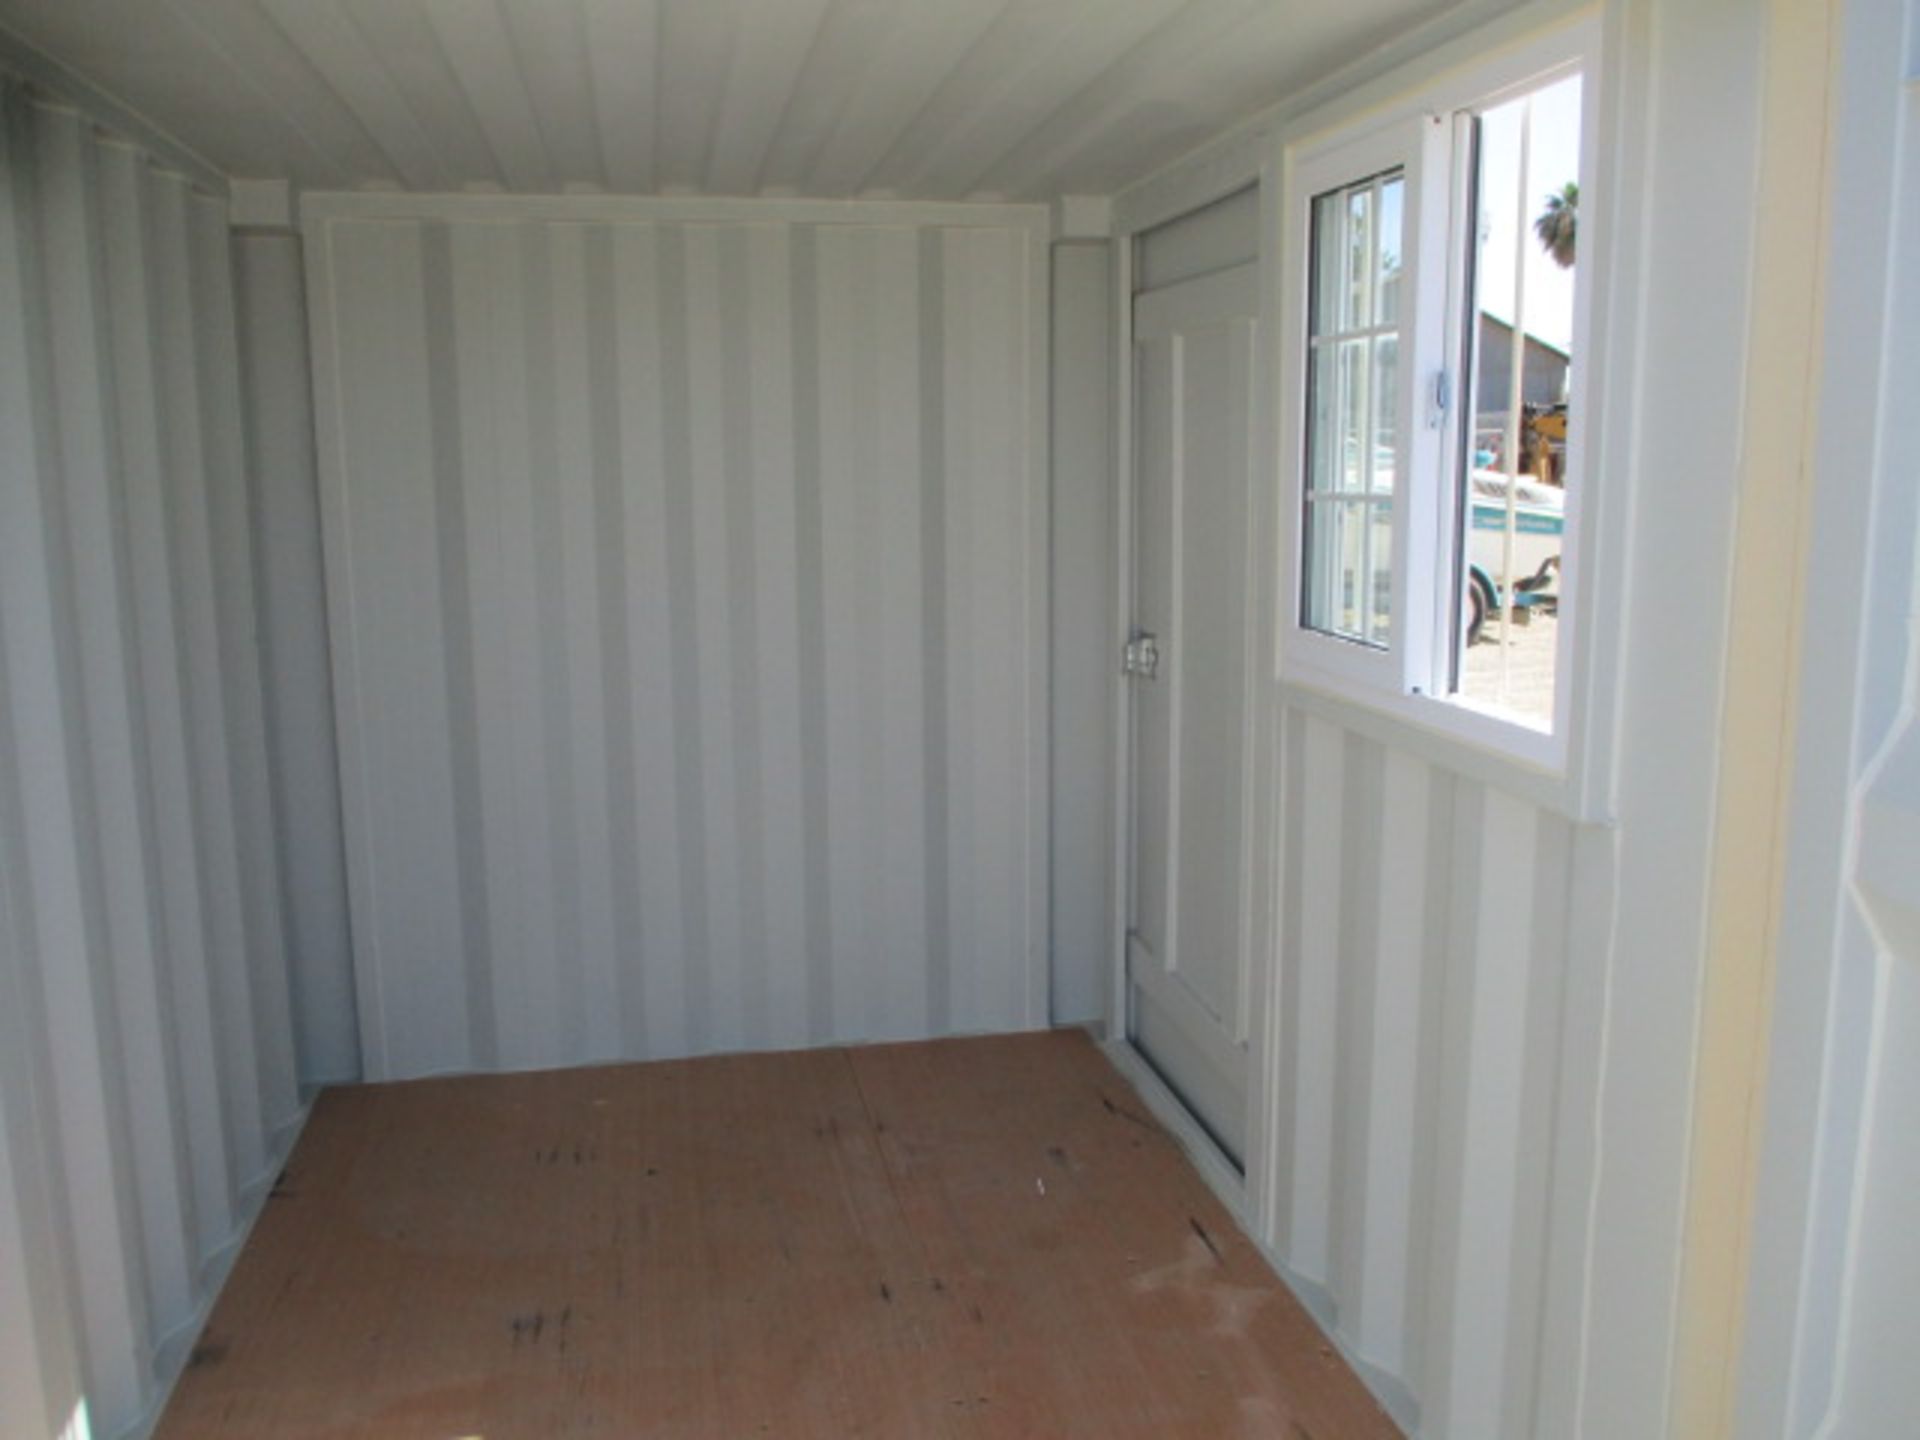 Unused 8' Portable Office Container, S/N: LYP8-436 - Image 18 of 24